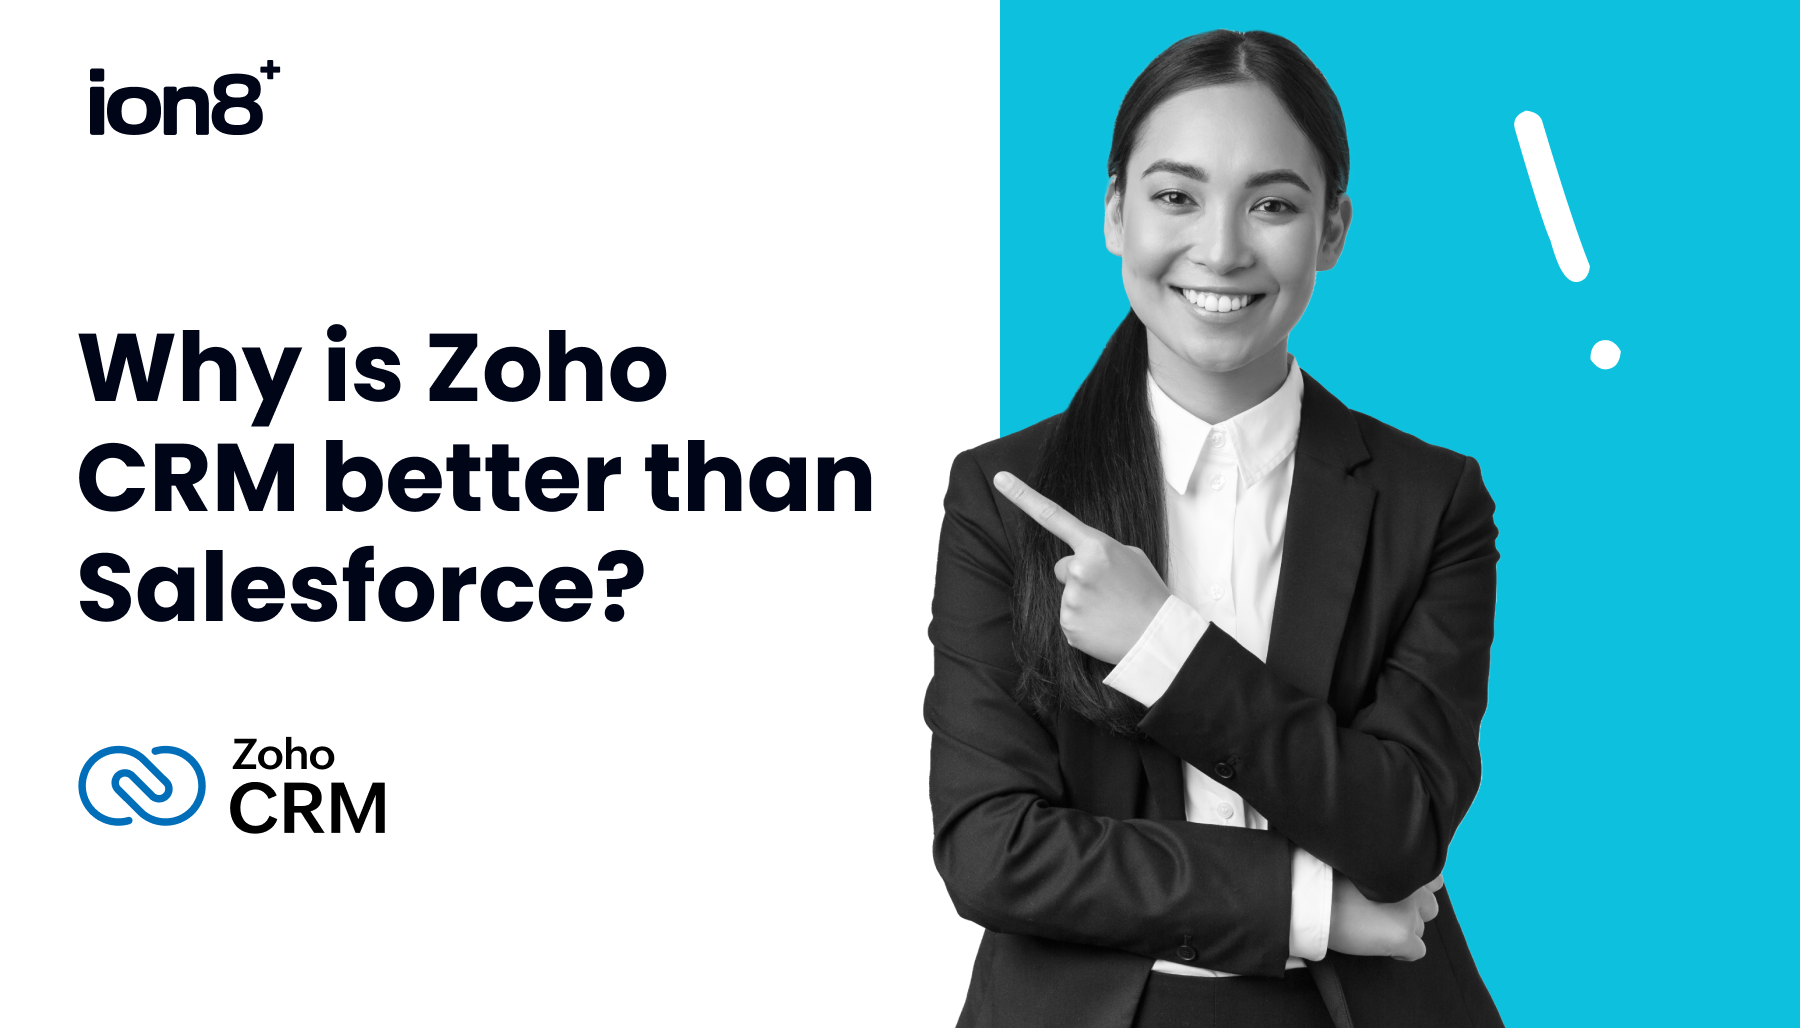 Why is Zoho CRM better than Salesforce?